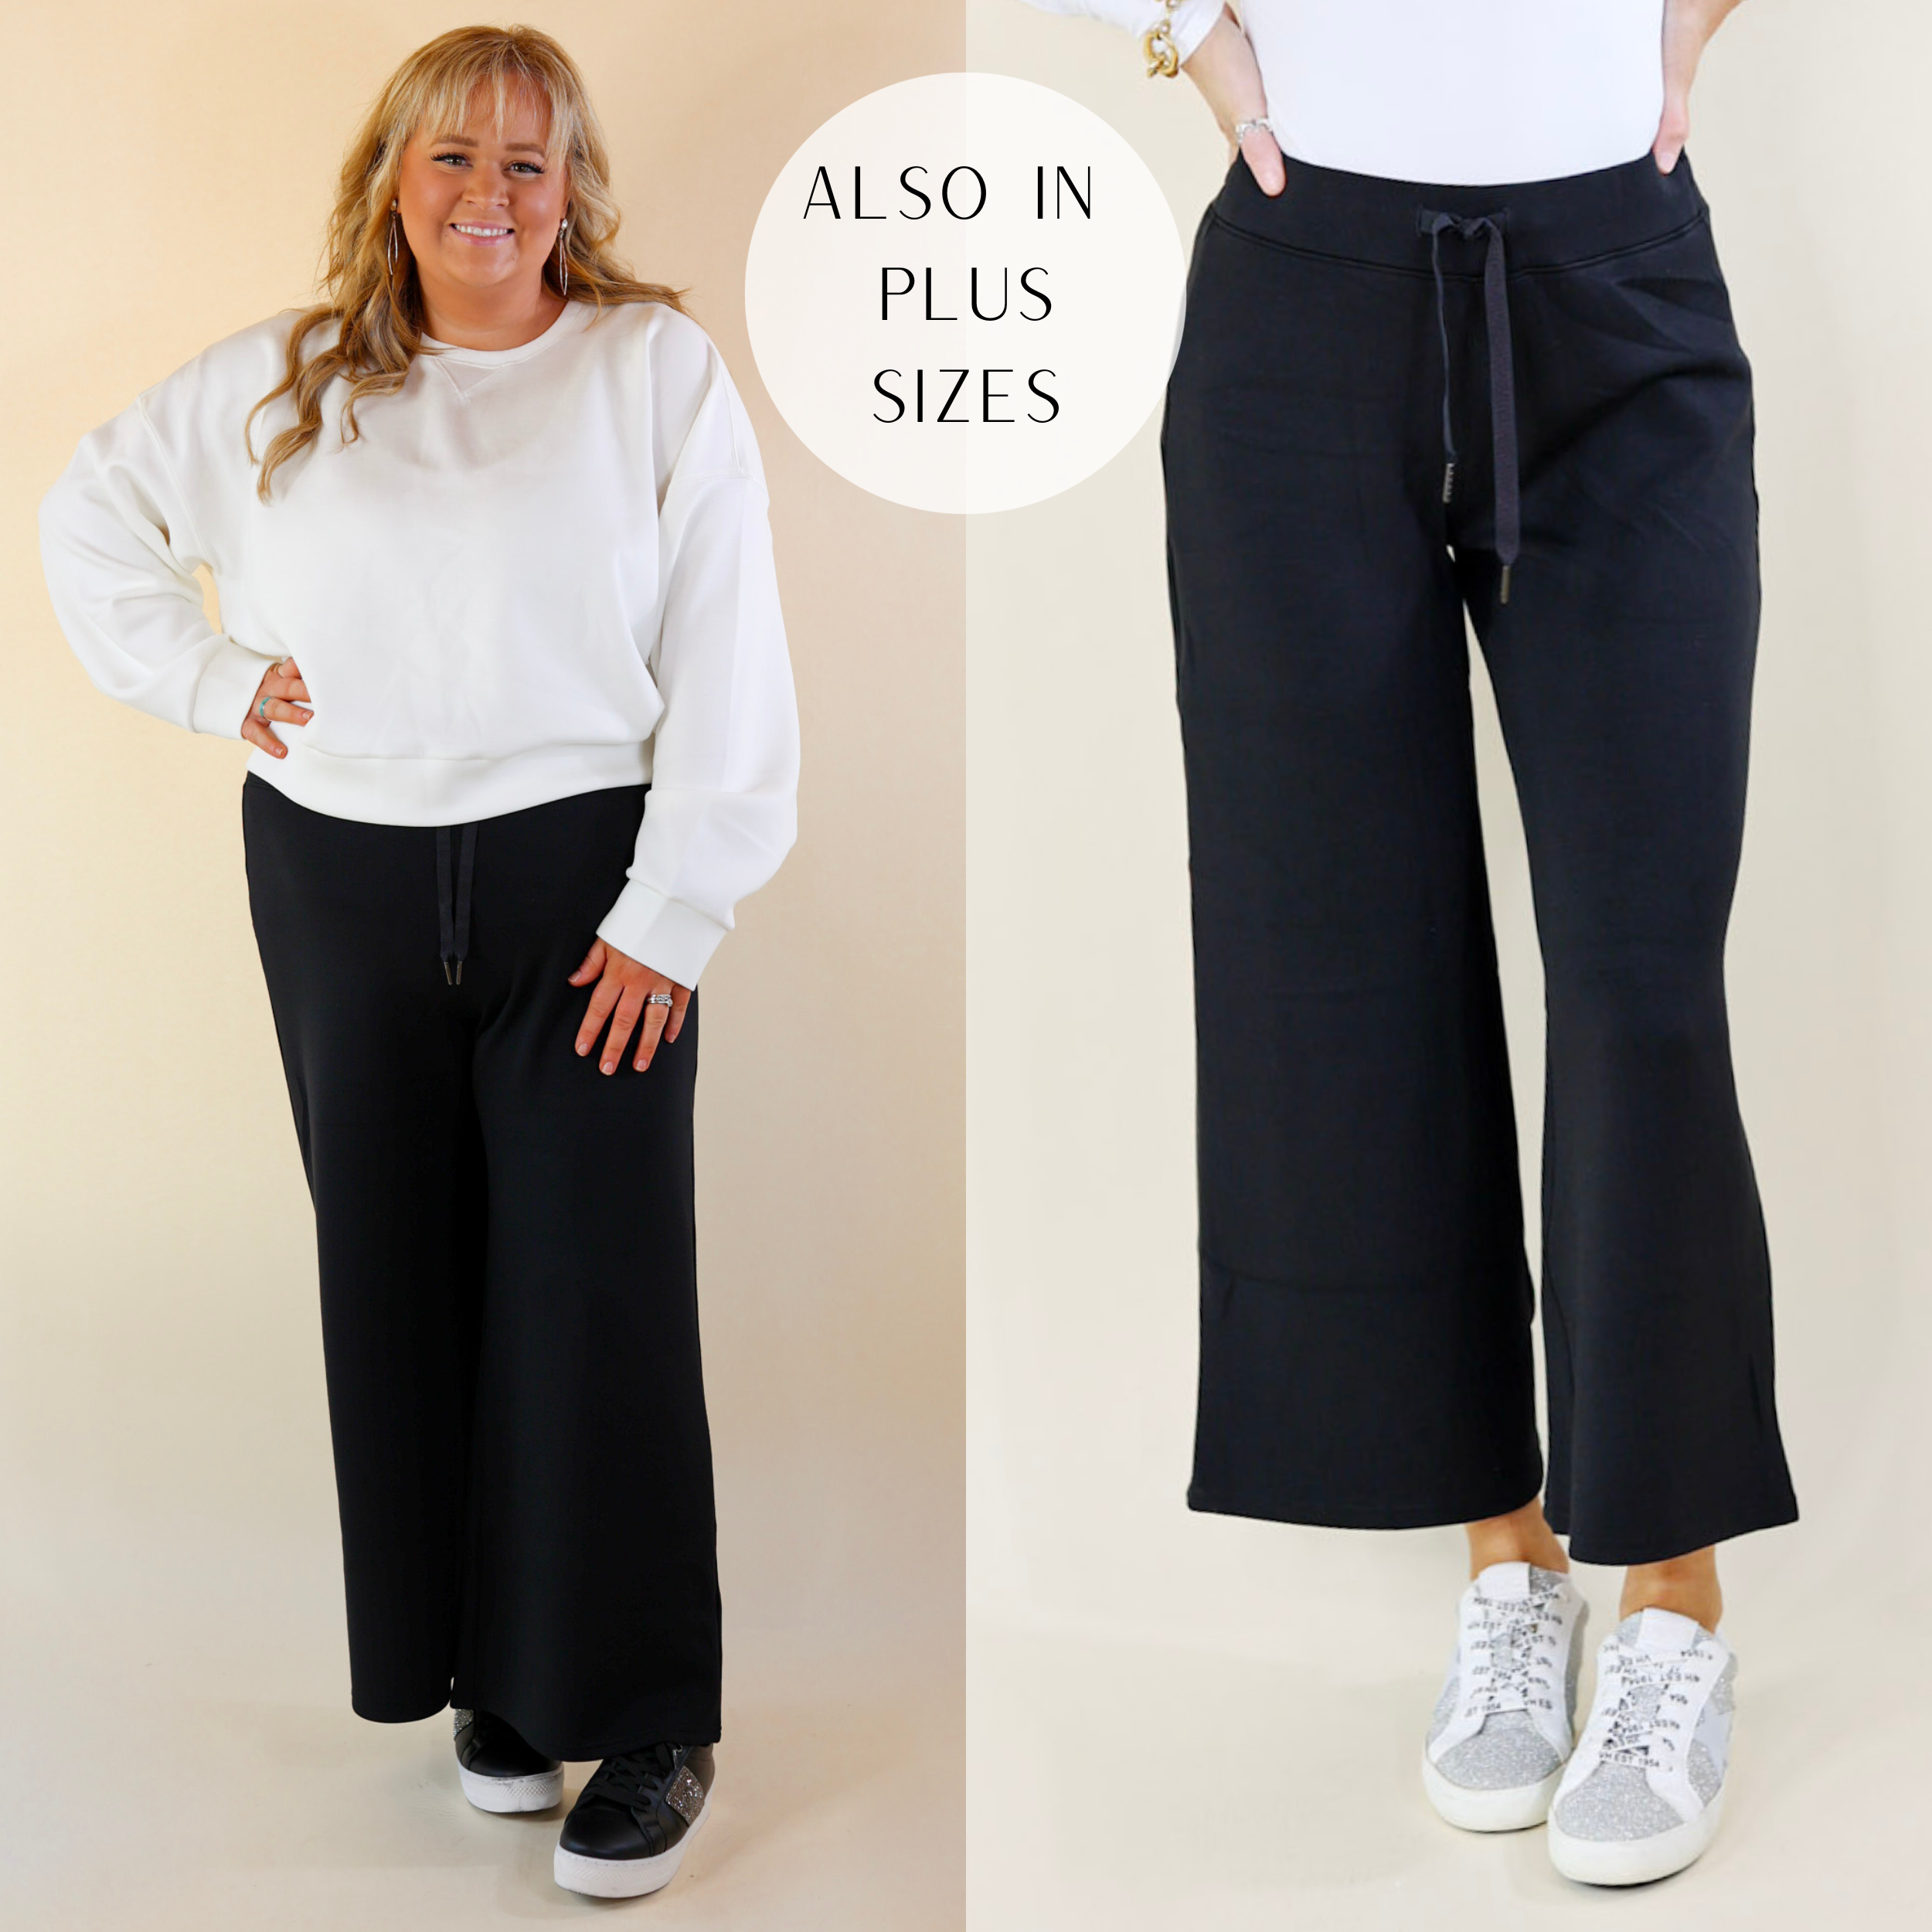 Models are wearing a pair of cropped wide leg sweatpants in black. Both models have it paired with a white top and sneakers.